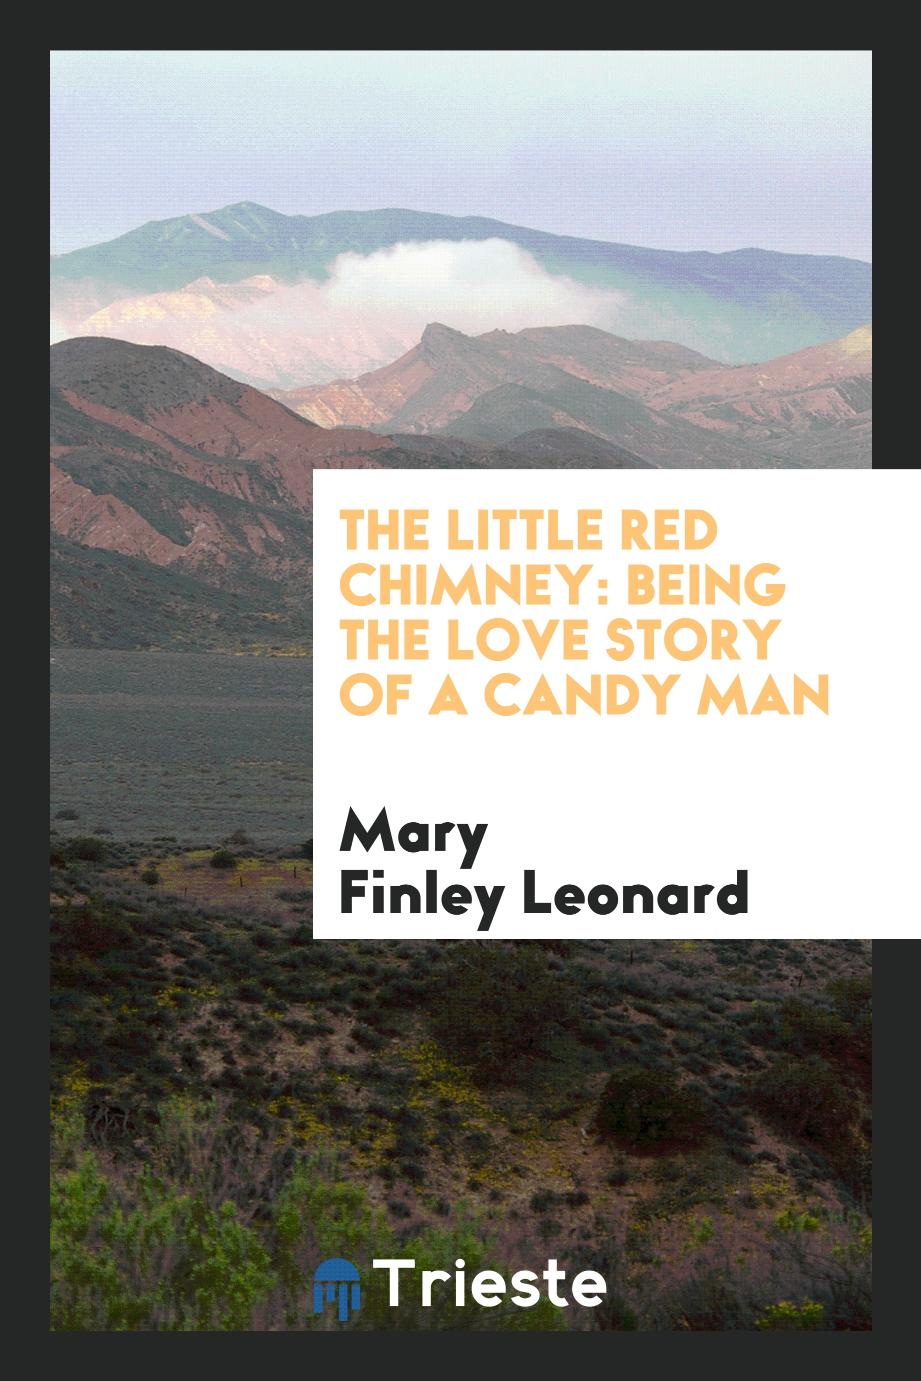 The Little Red Chimney: Being the Love Story of a Candy Man